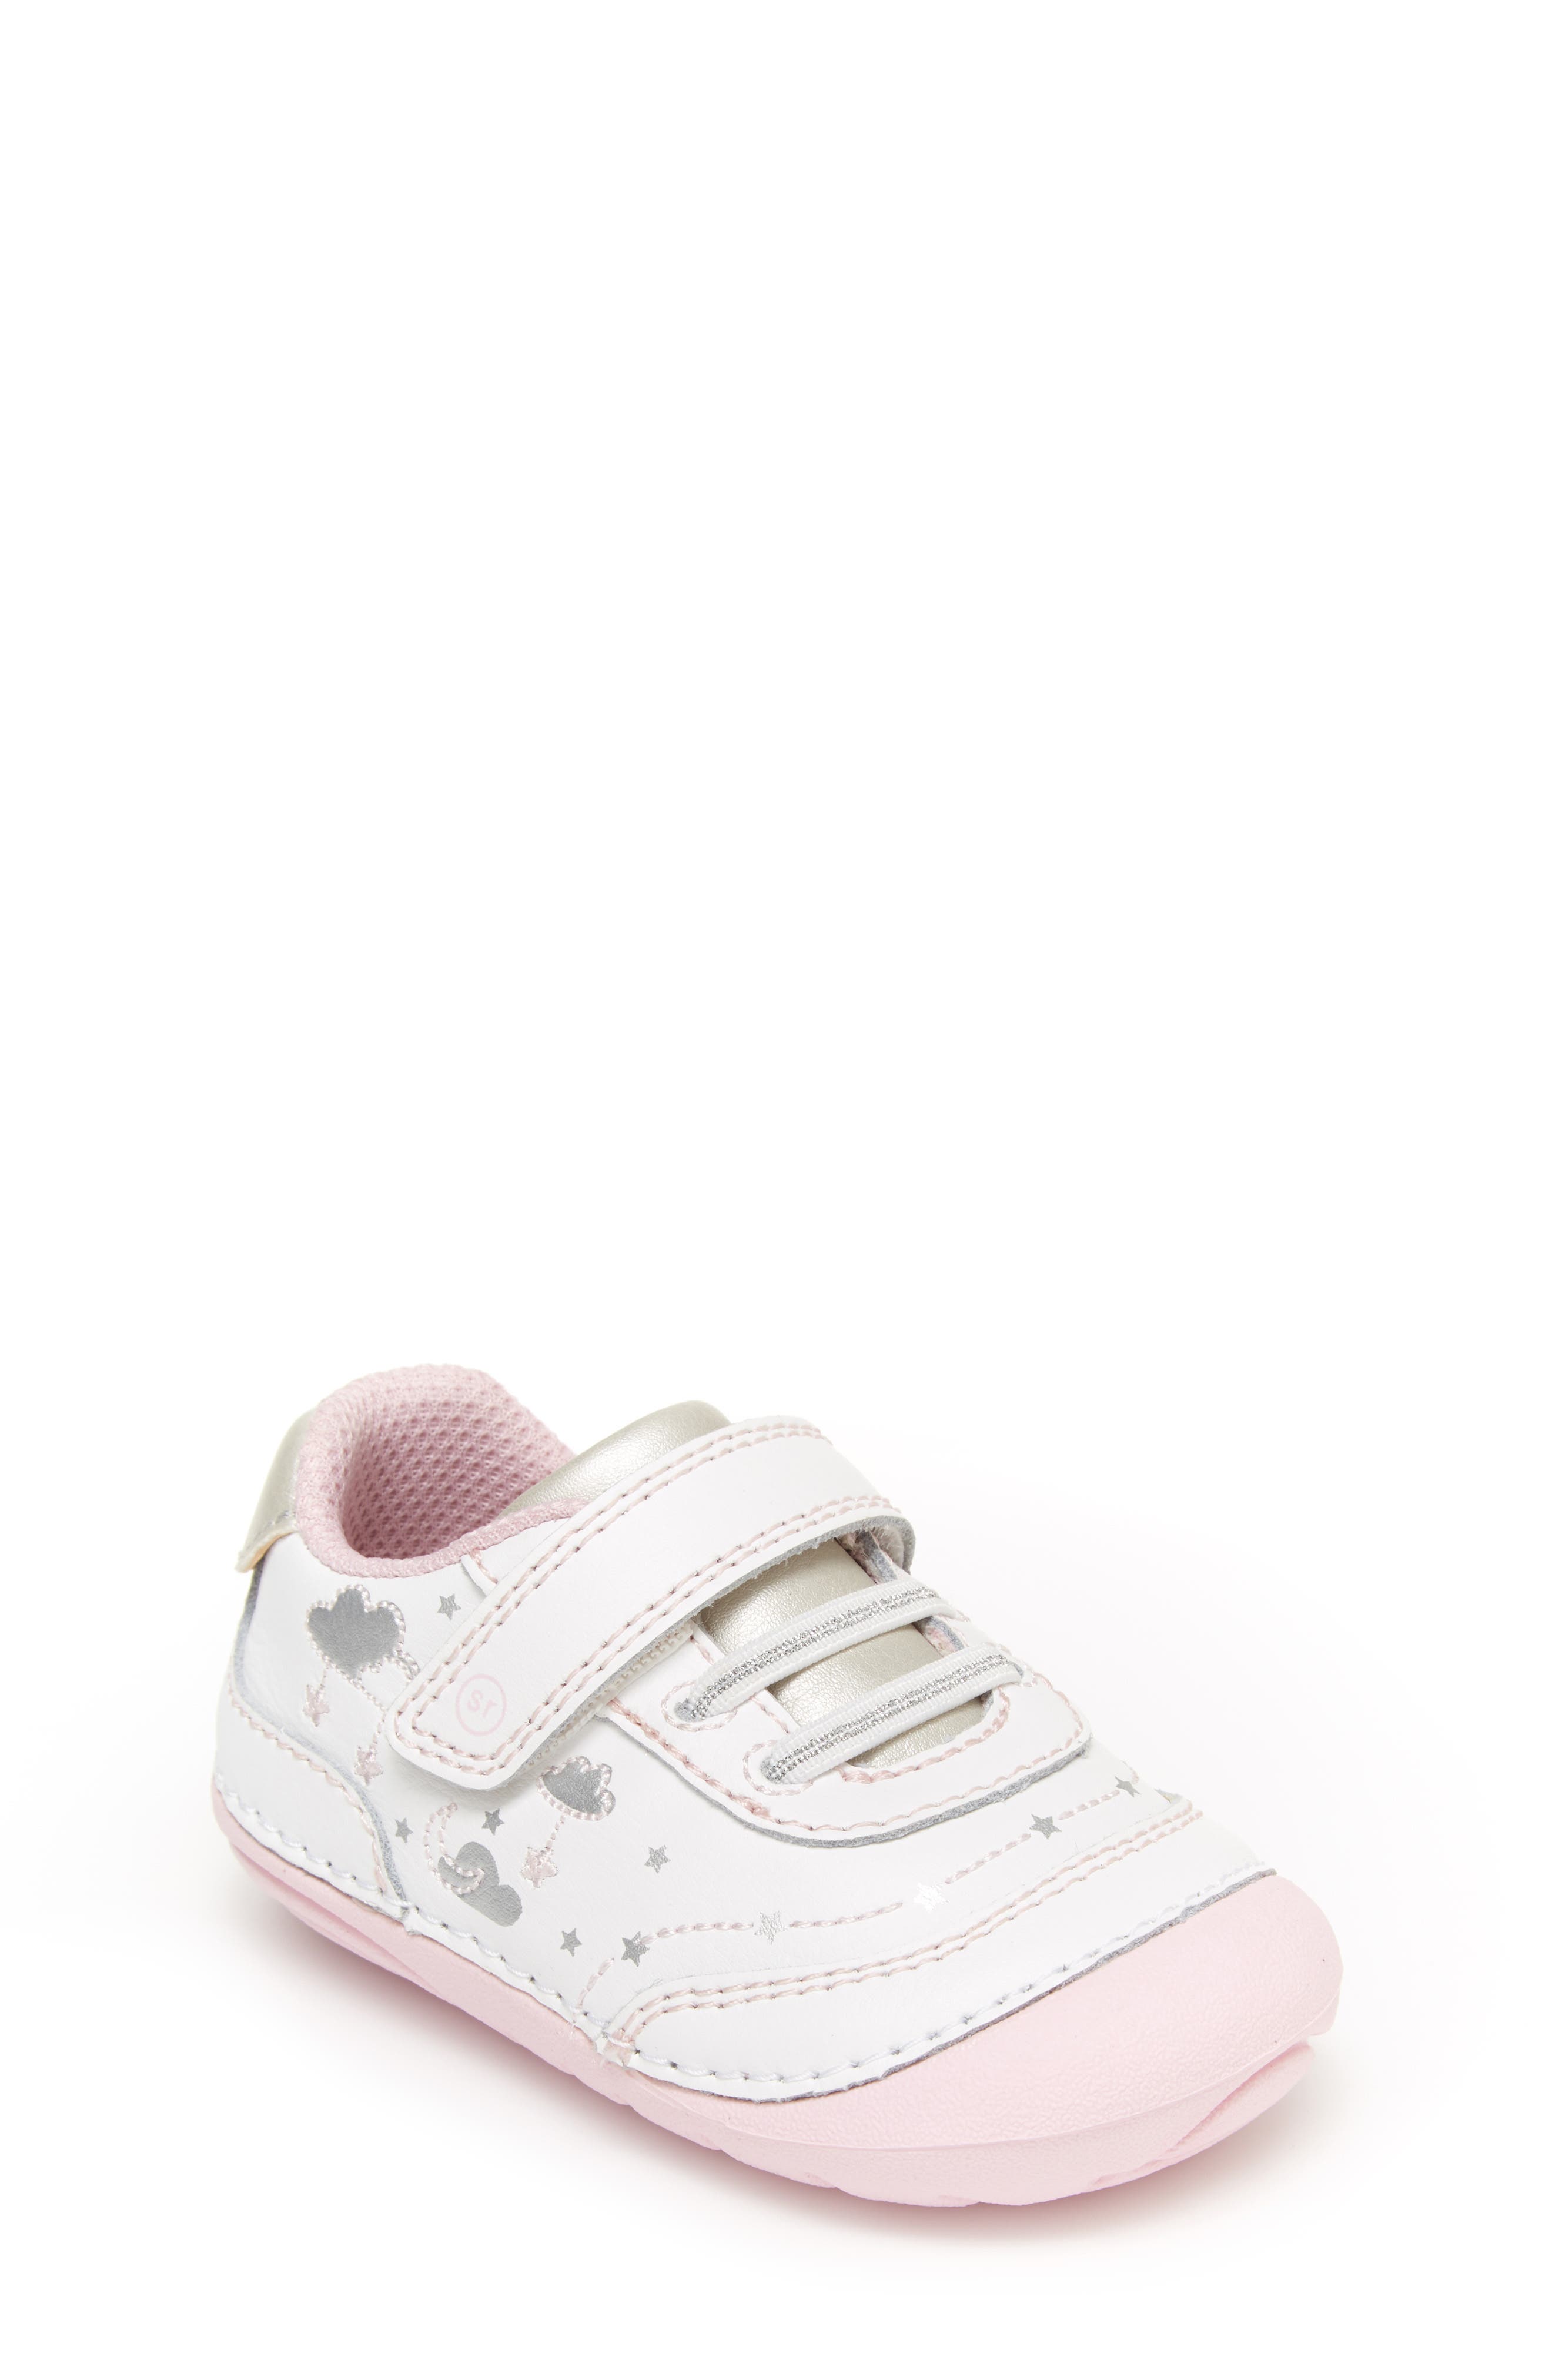 baby walking shoes in store